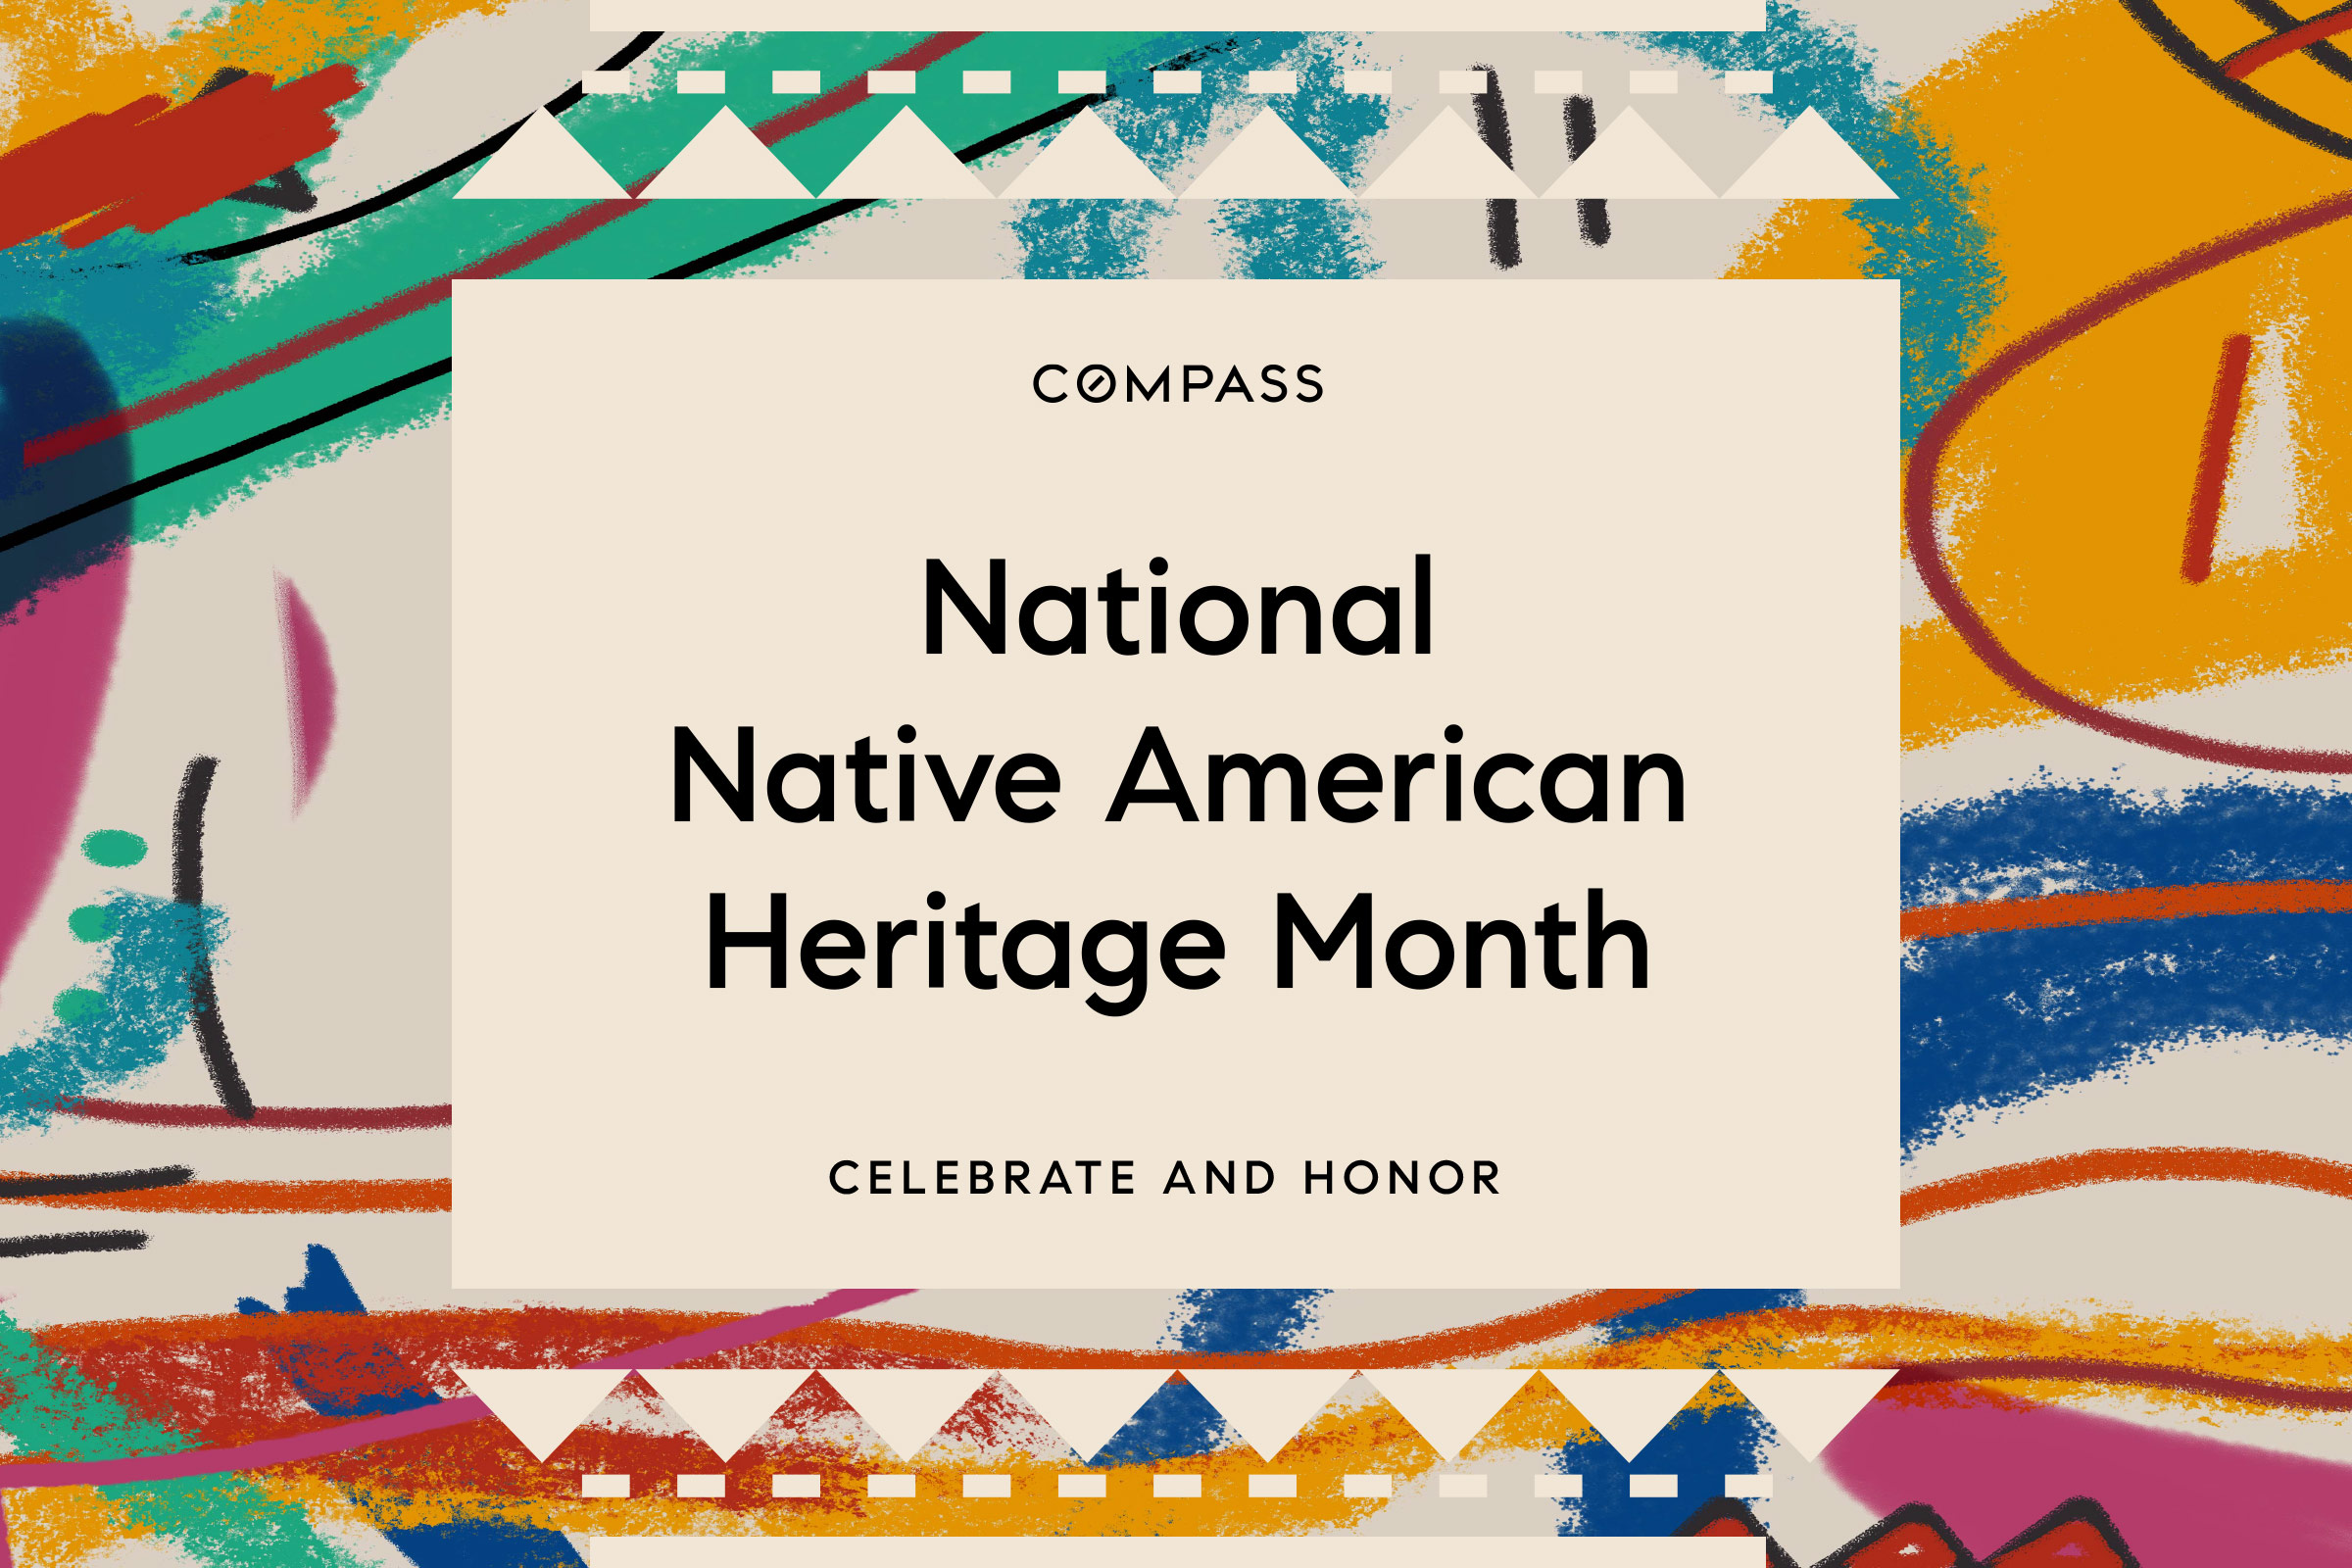 Celebrating National Native American Heritage Month with Our Compass Community